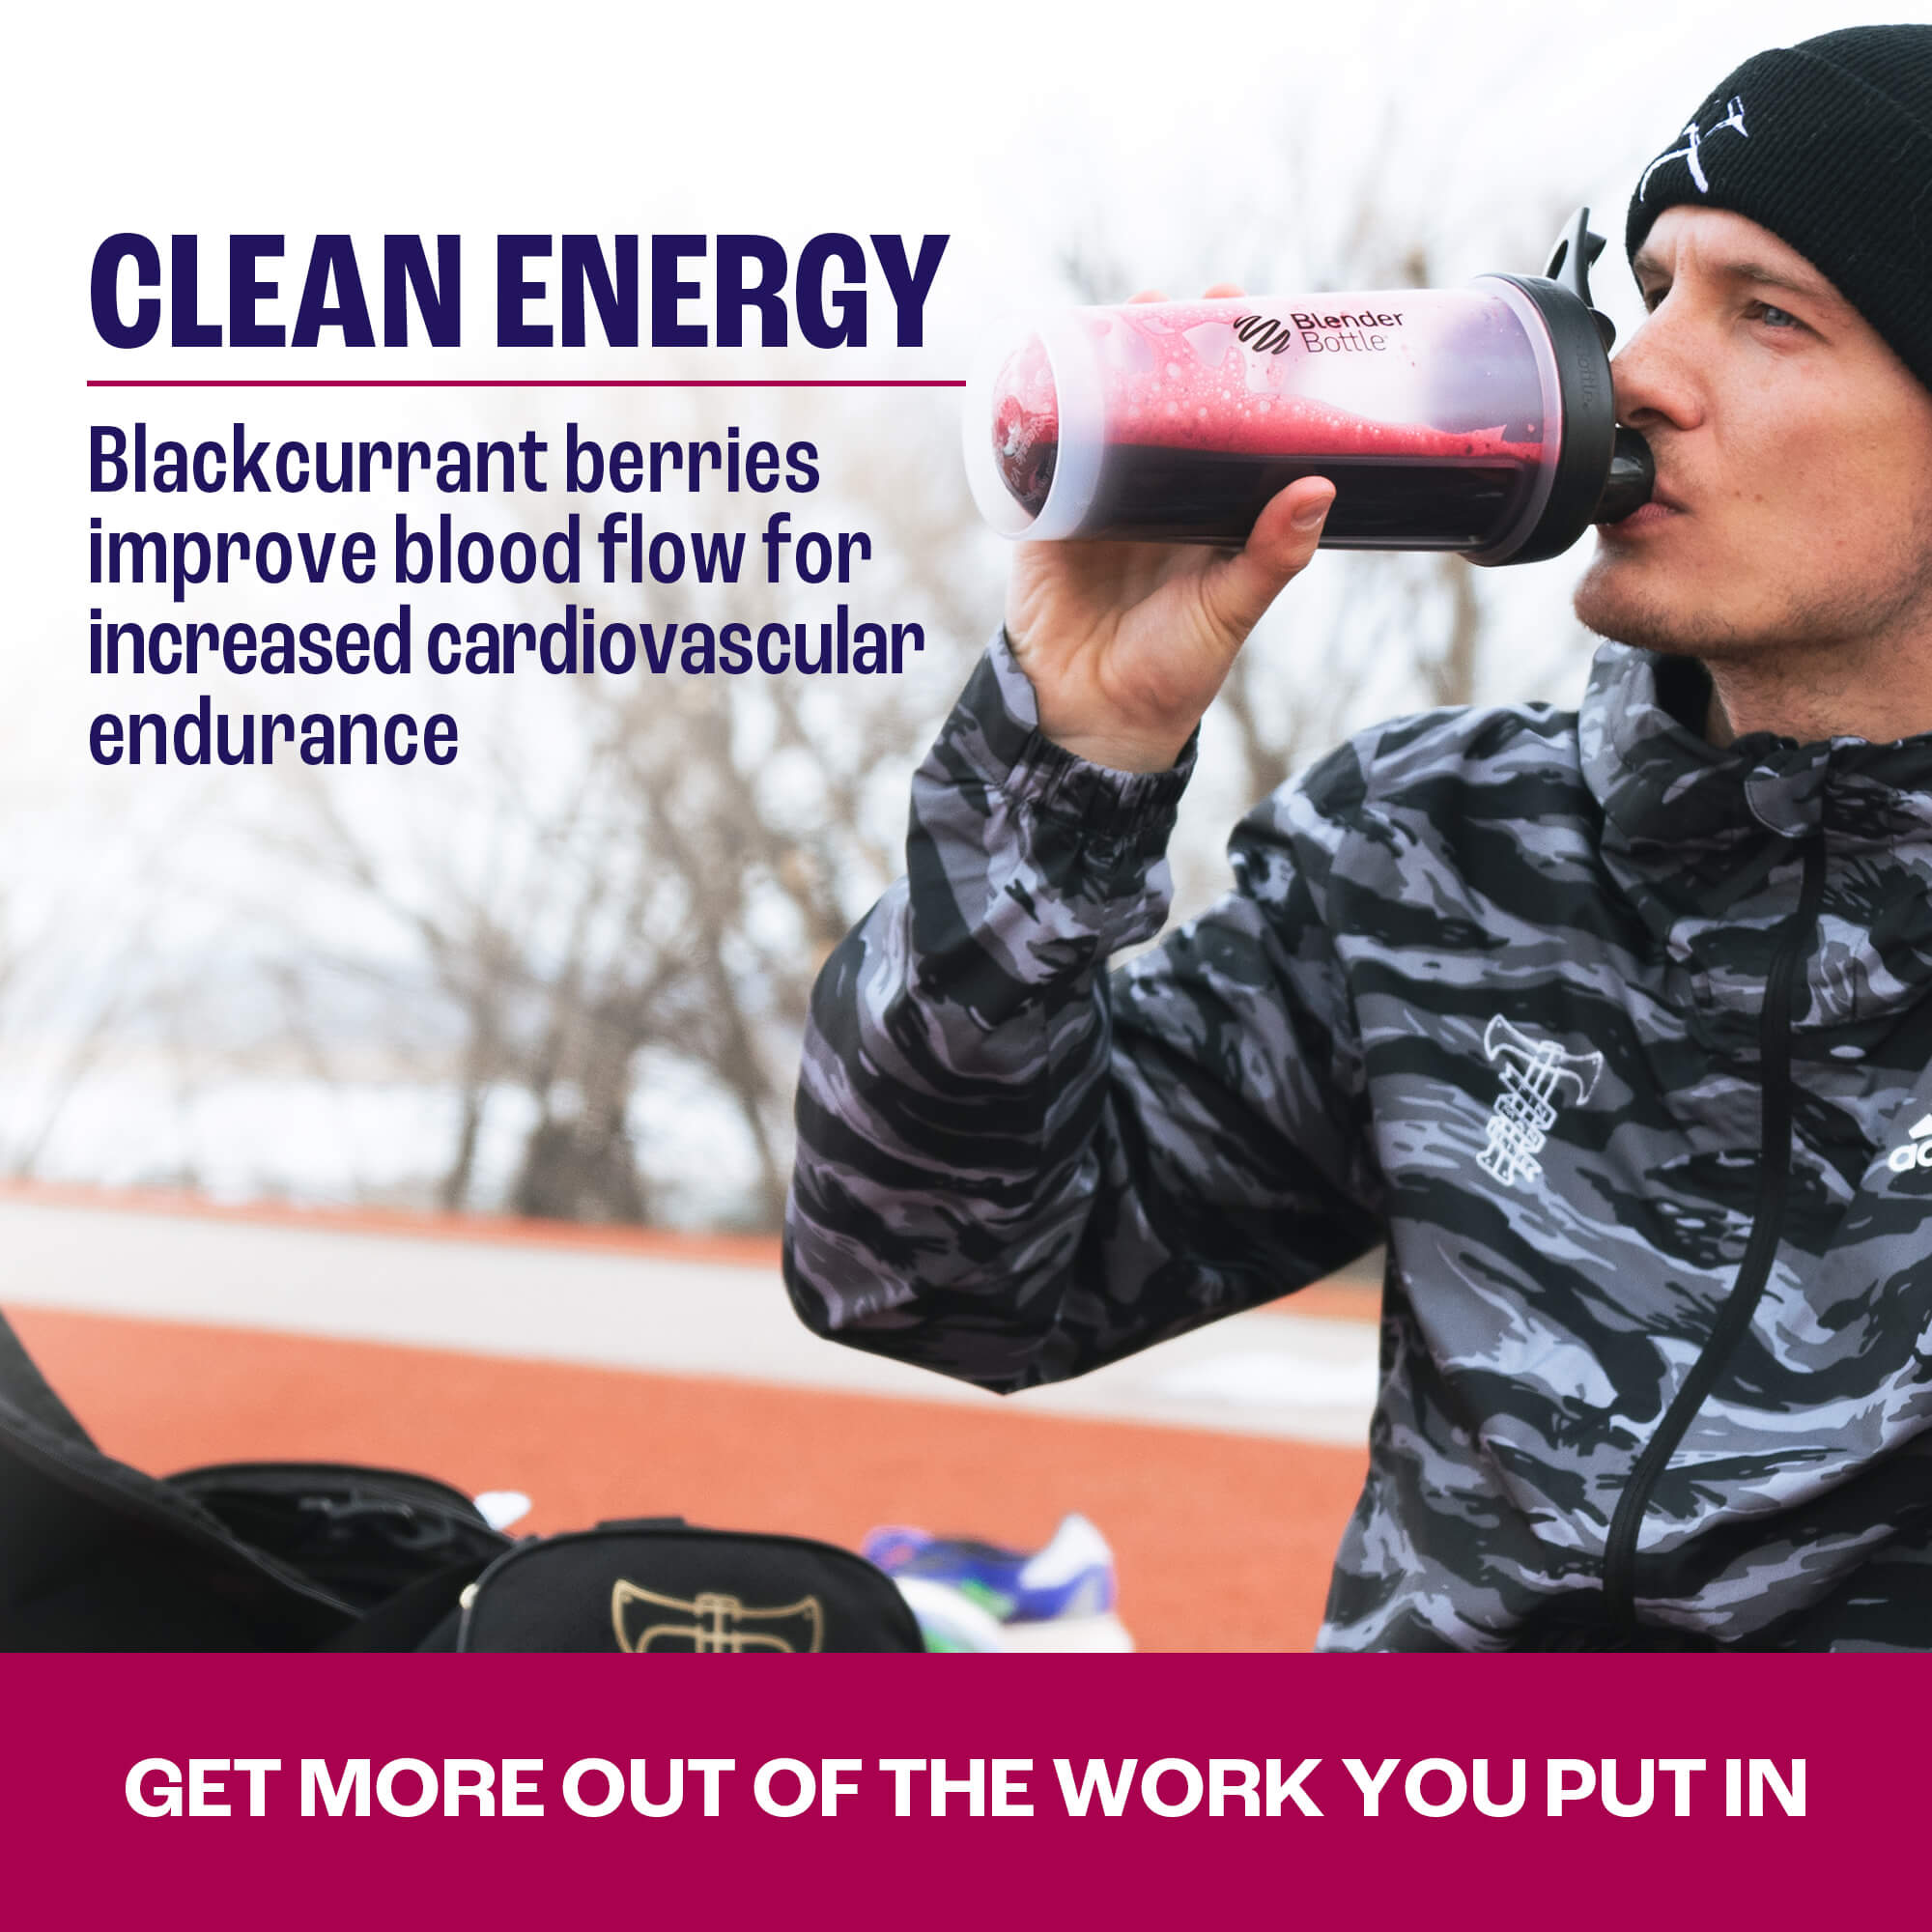 Blackcurrant berries give you pure cardio energy